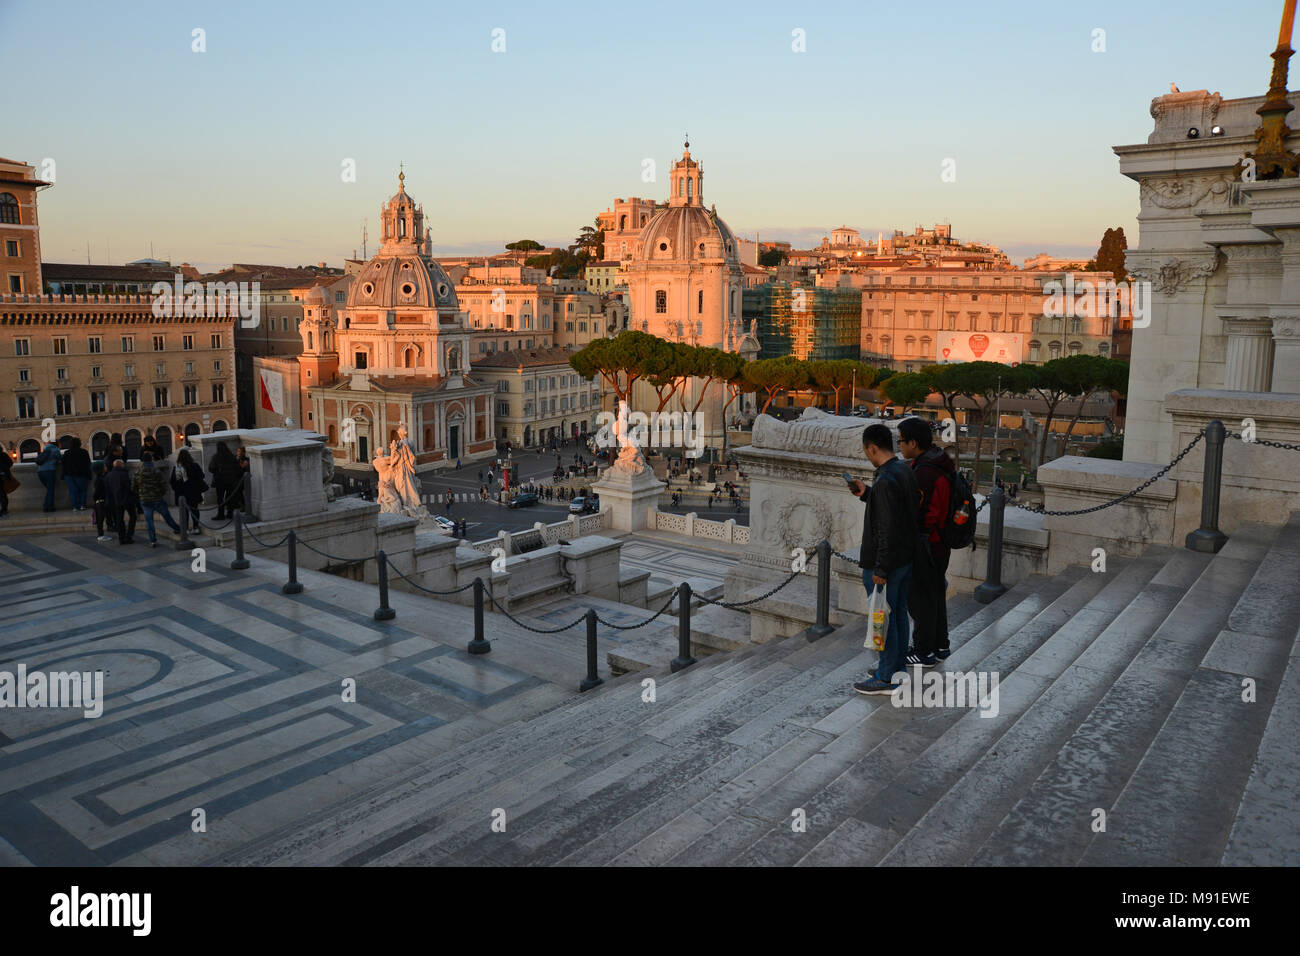 Steps with two people standing leading down from the Altare della Patria in Rome Italy in autumn evening light Stock Photo